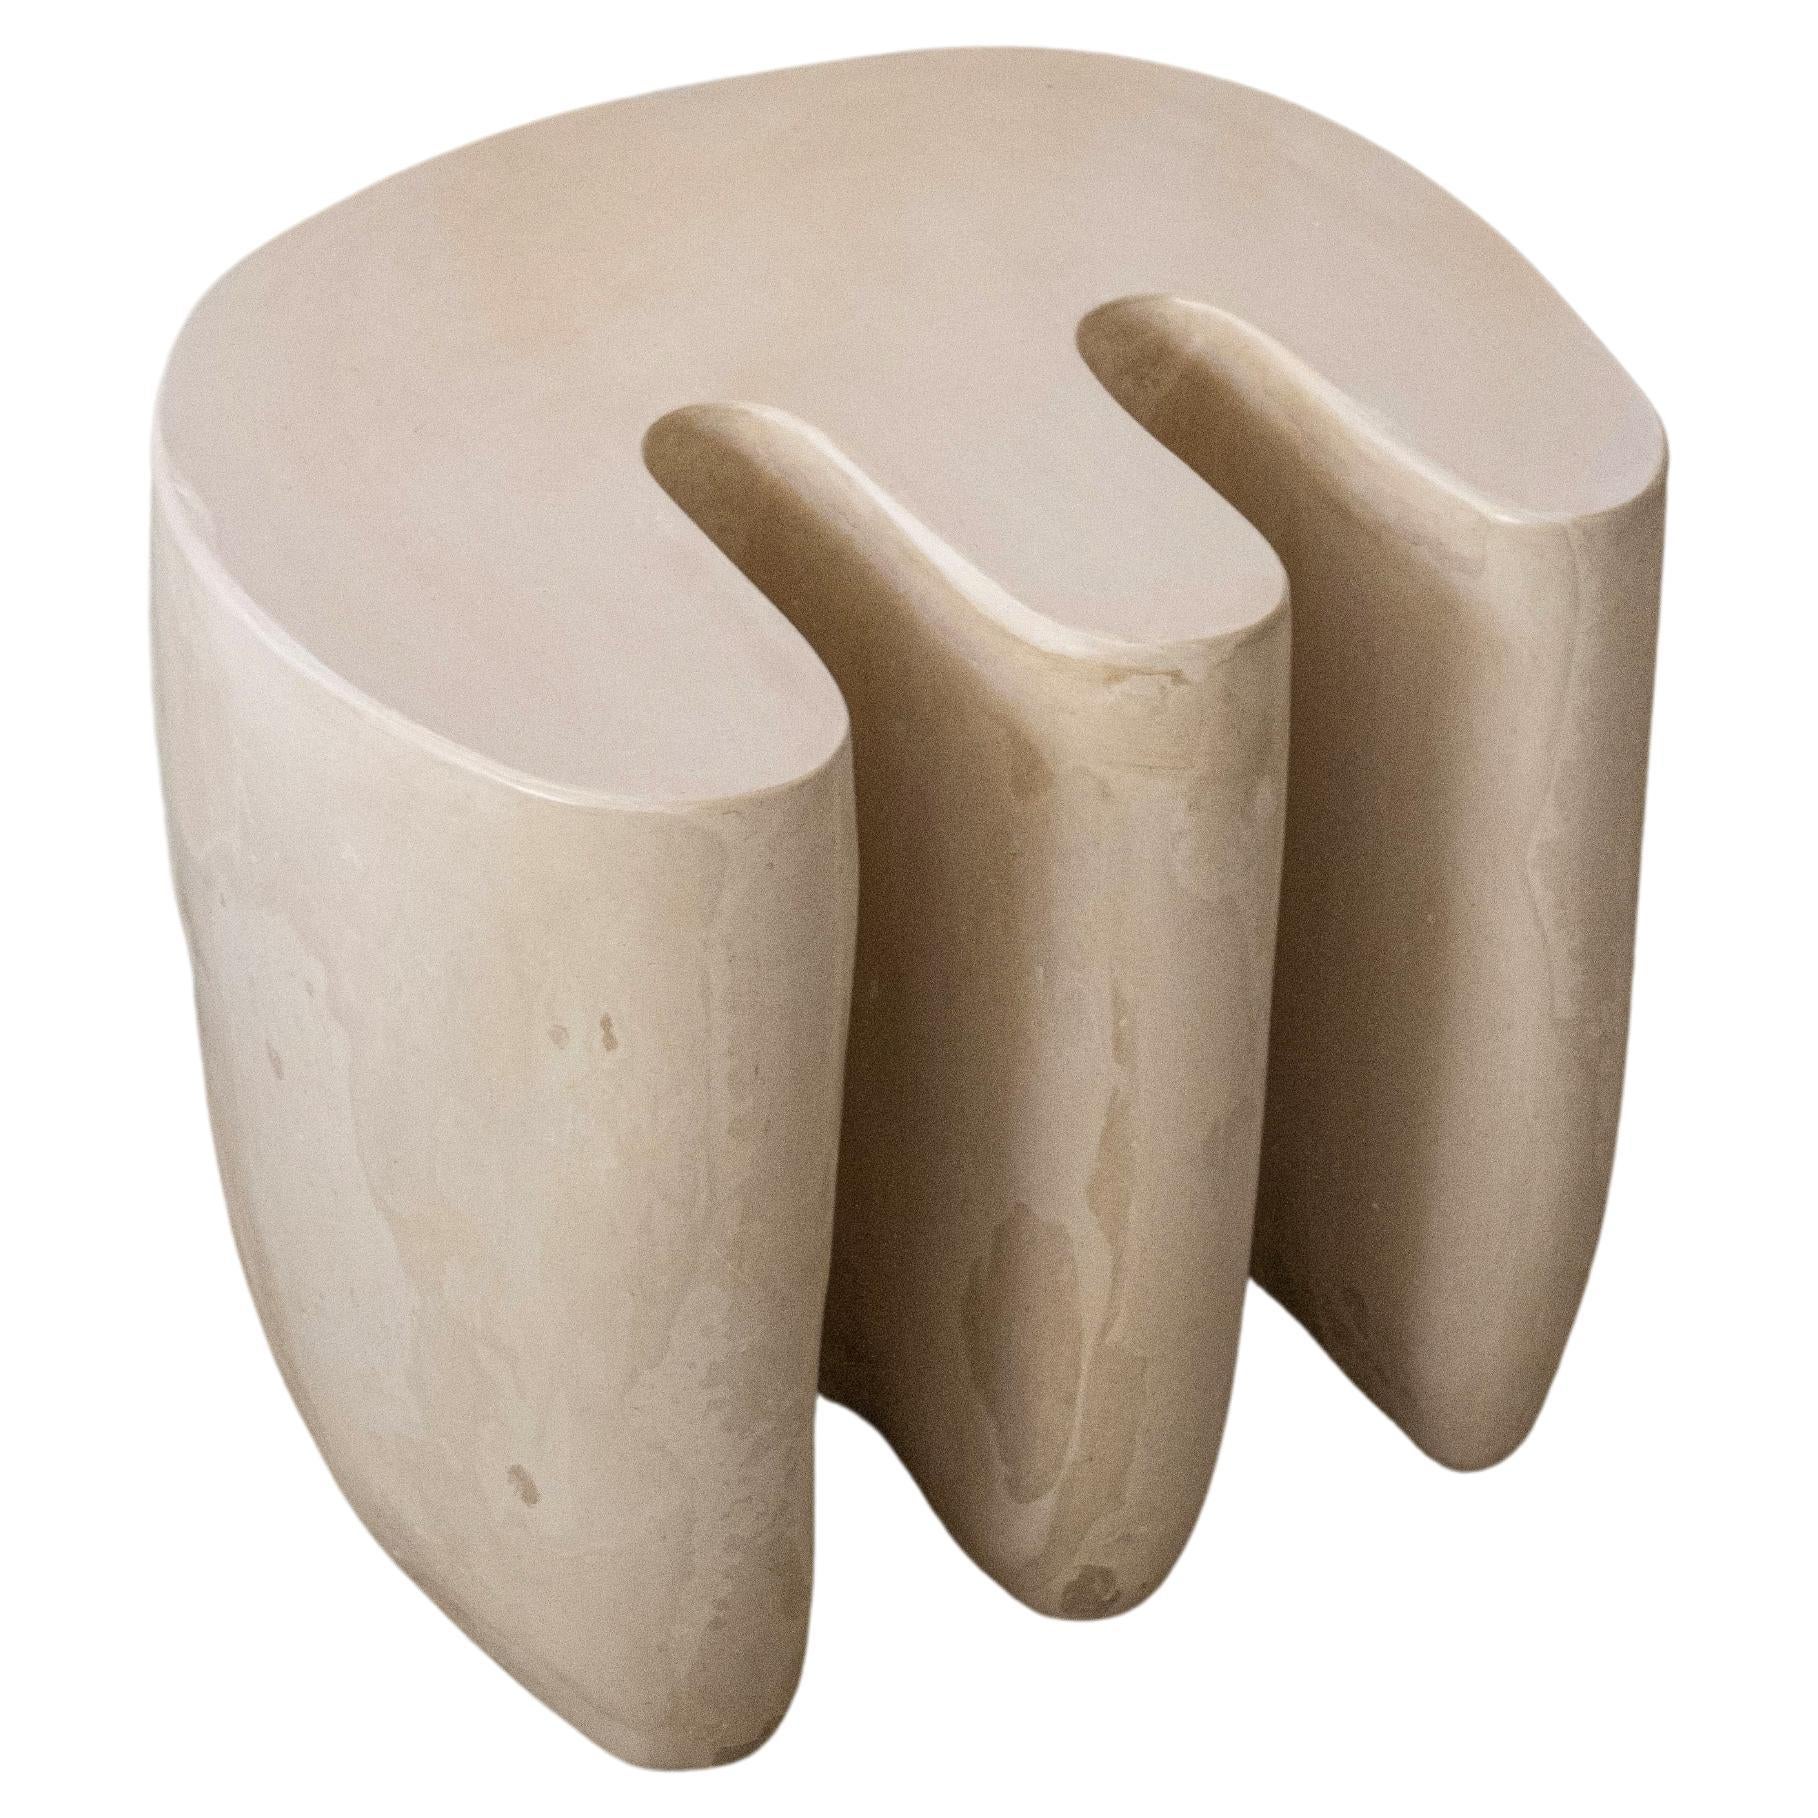 Organic Side Table - Handmade Gypsum Side Table - Limited Collectible Design For Sale